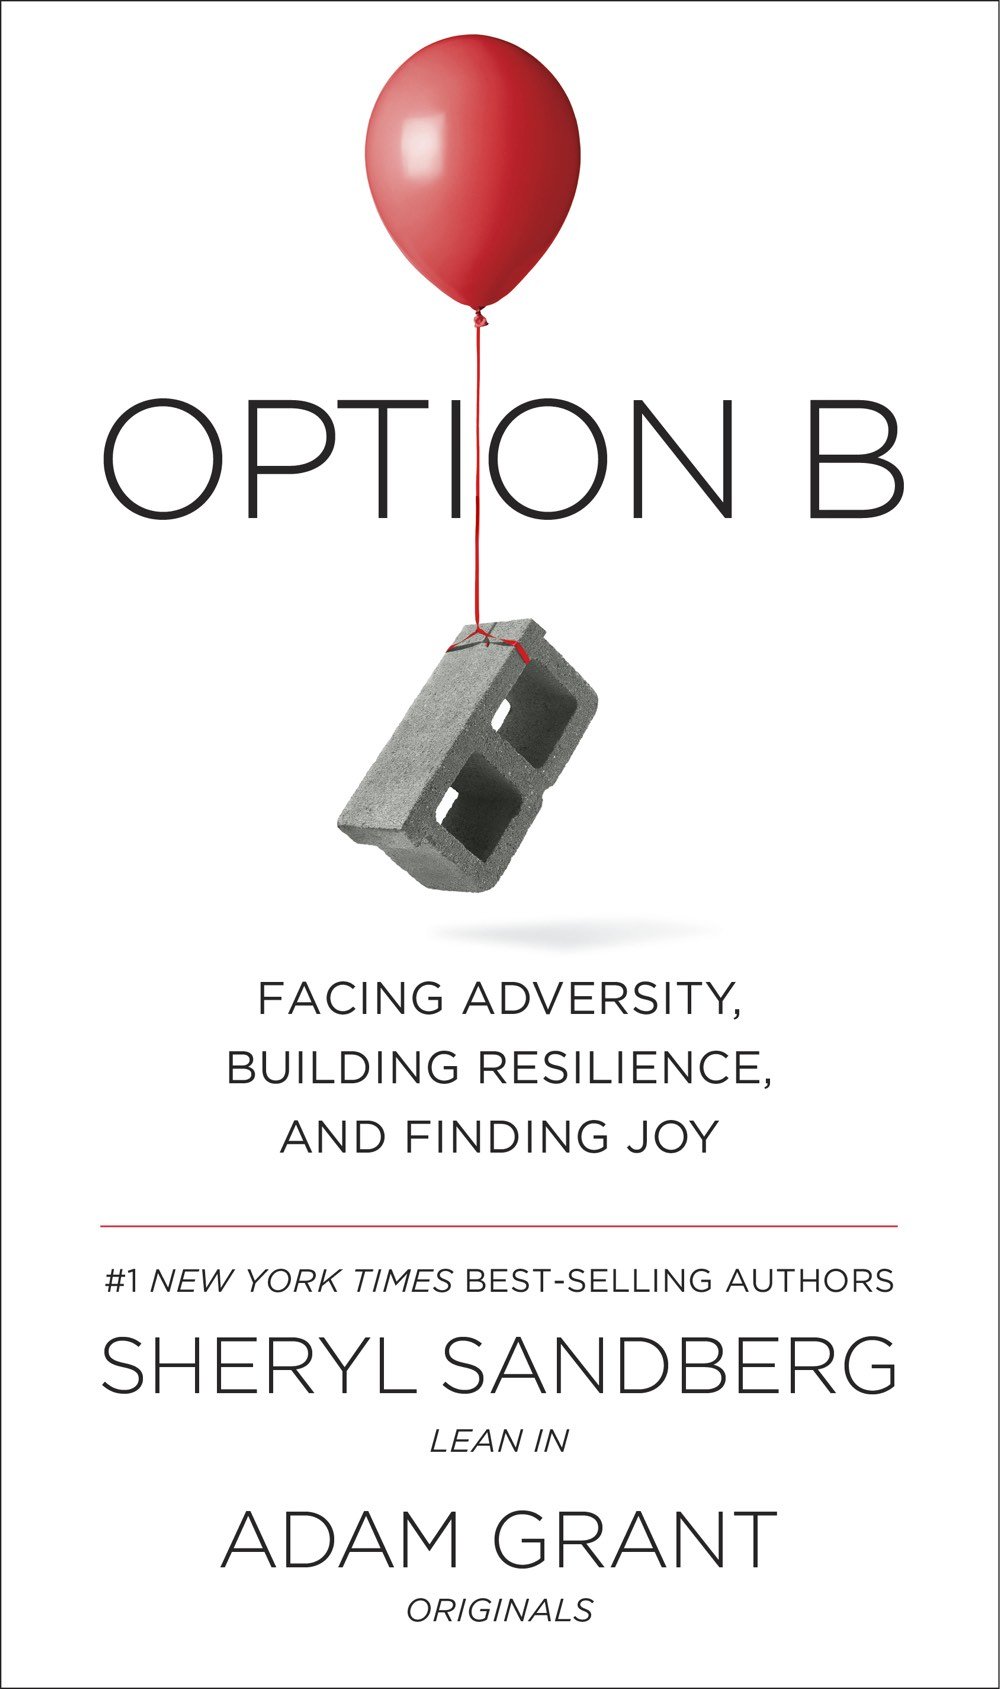 Option B: building resilience and finding meaning in the face of